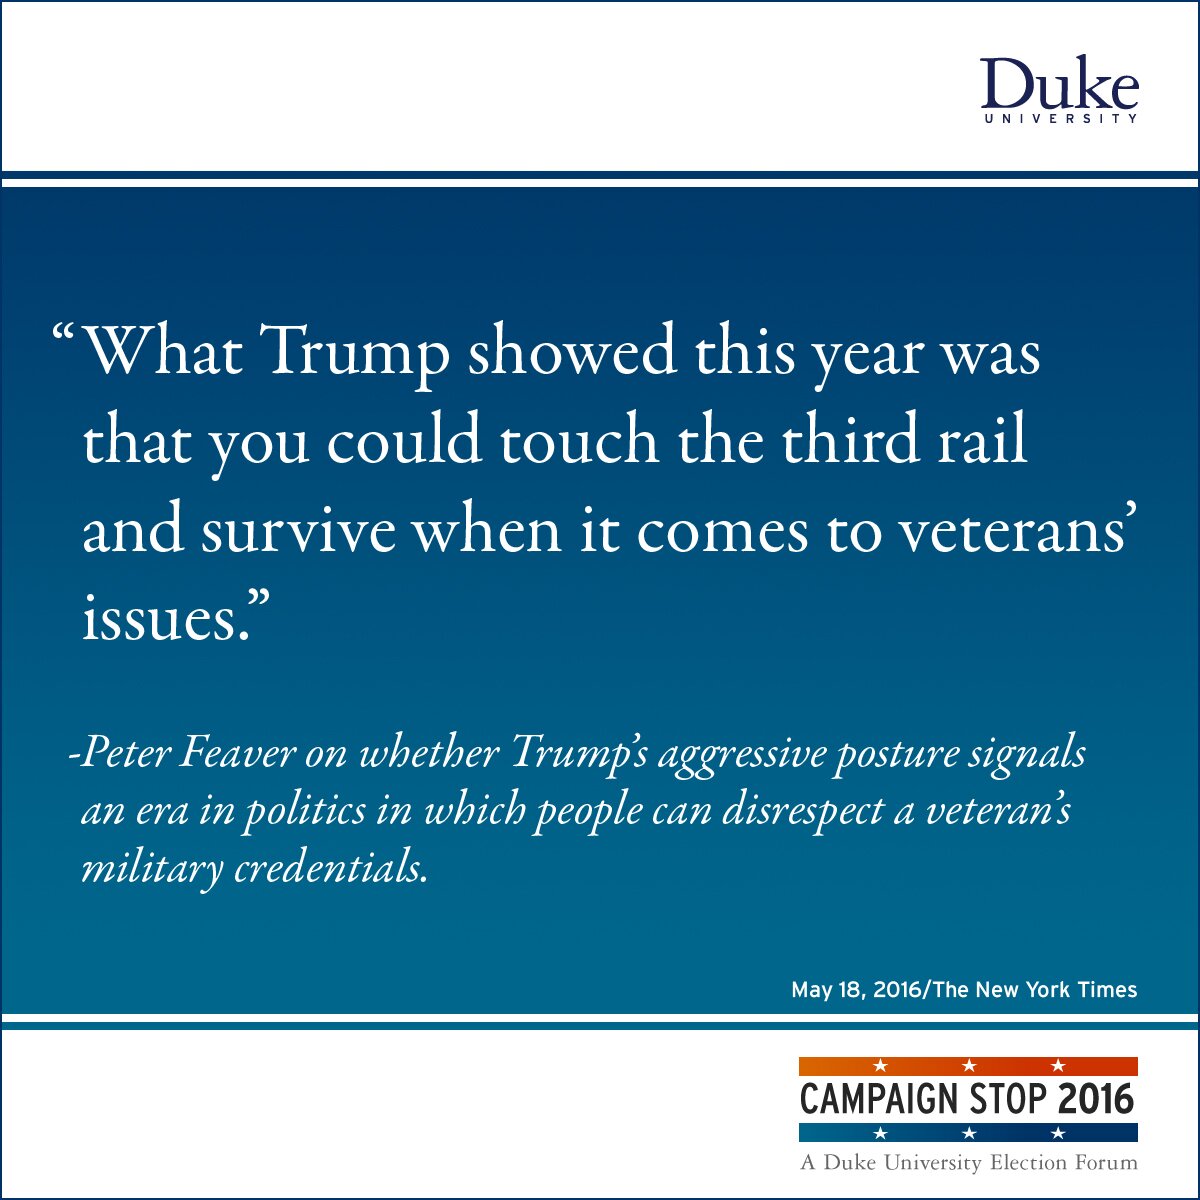 “What Trump showed this year was that you could touch the third rail and survive when it comes to veterans’ issues.” -Peter Feaver on whether Trump’s aggressive posture signals an era in politics in which people can disrespect a veteran’s military credentials.